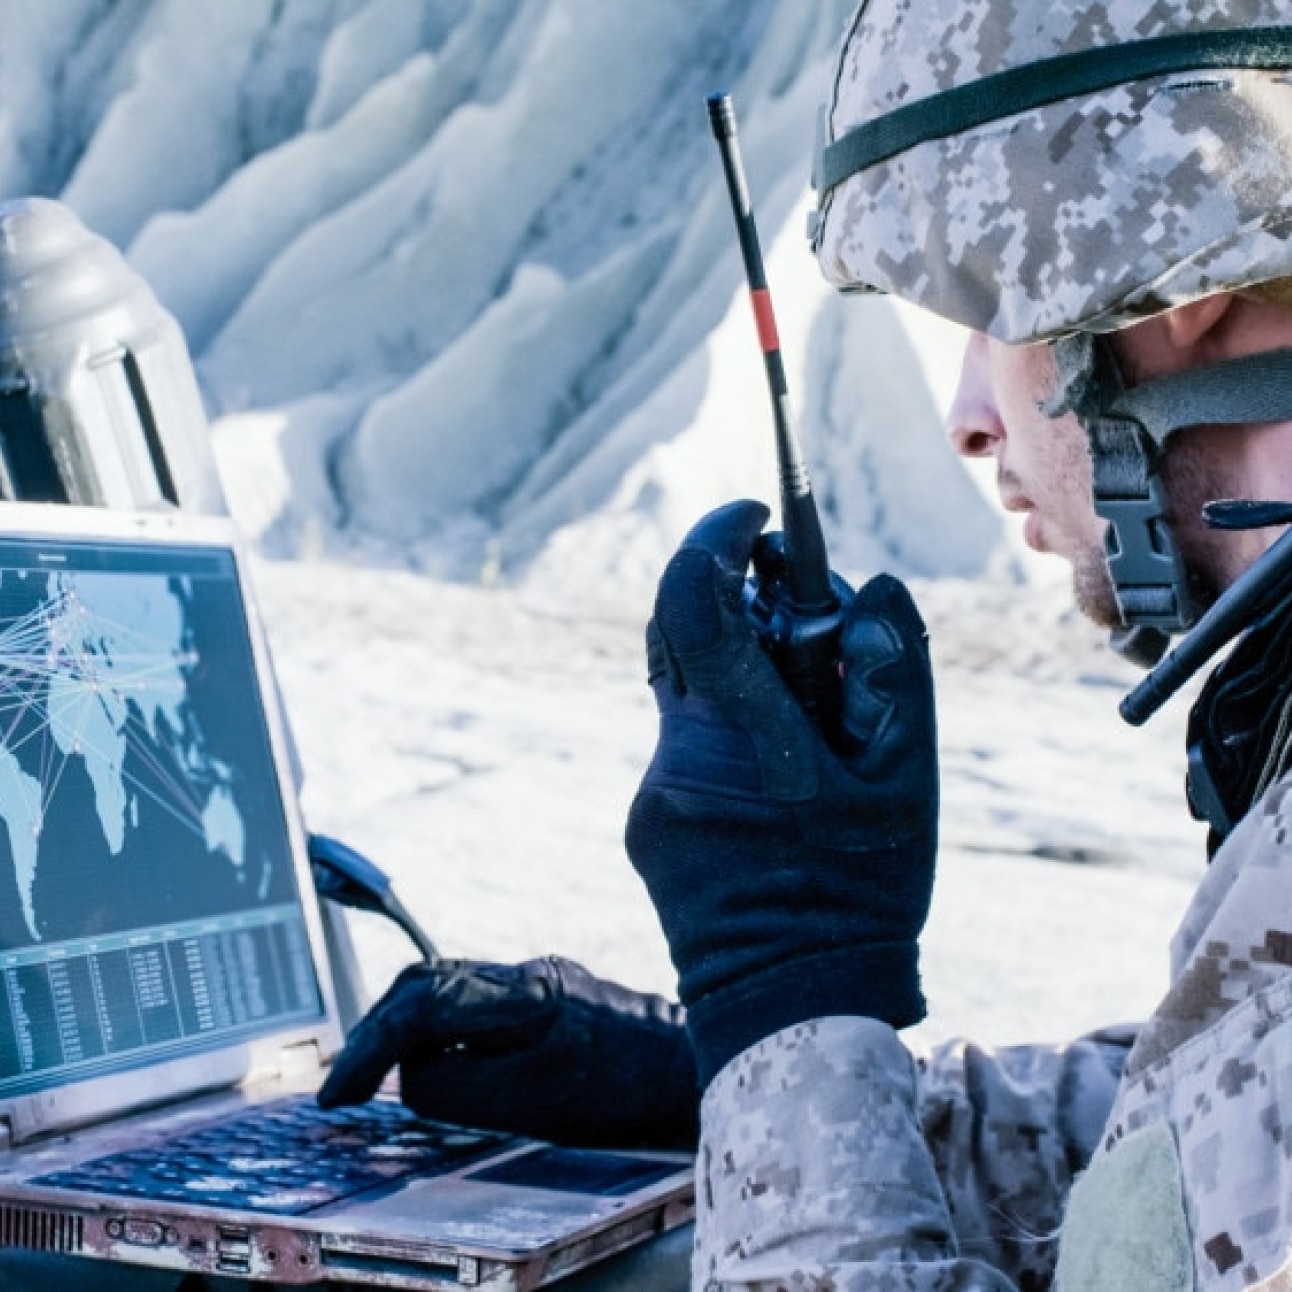 solider working on laptop in the field